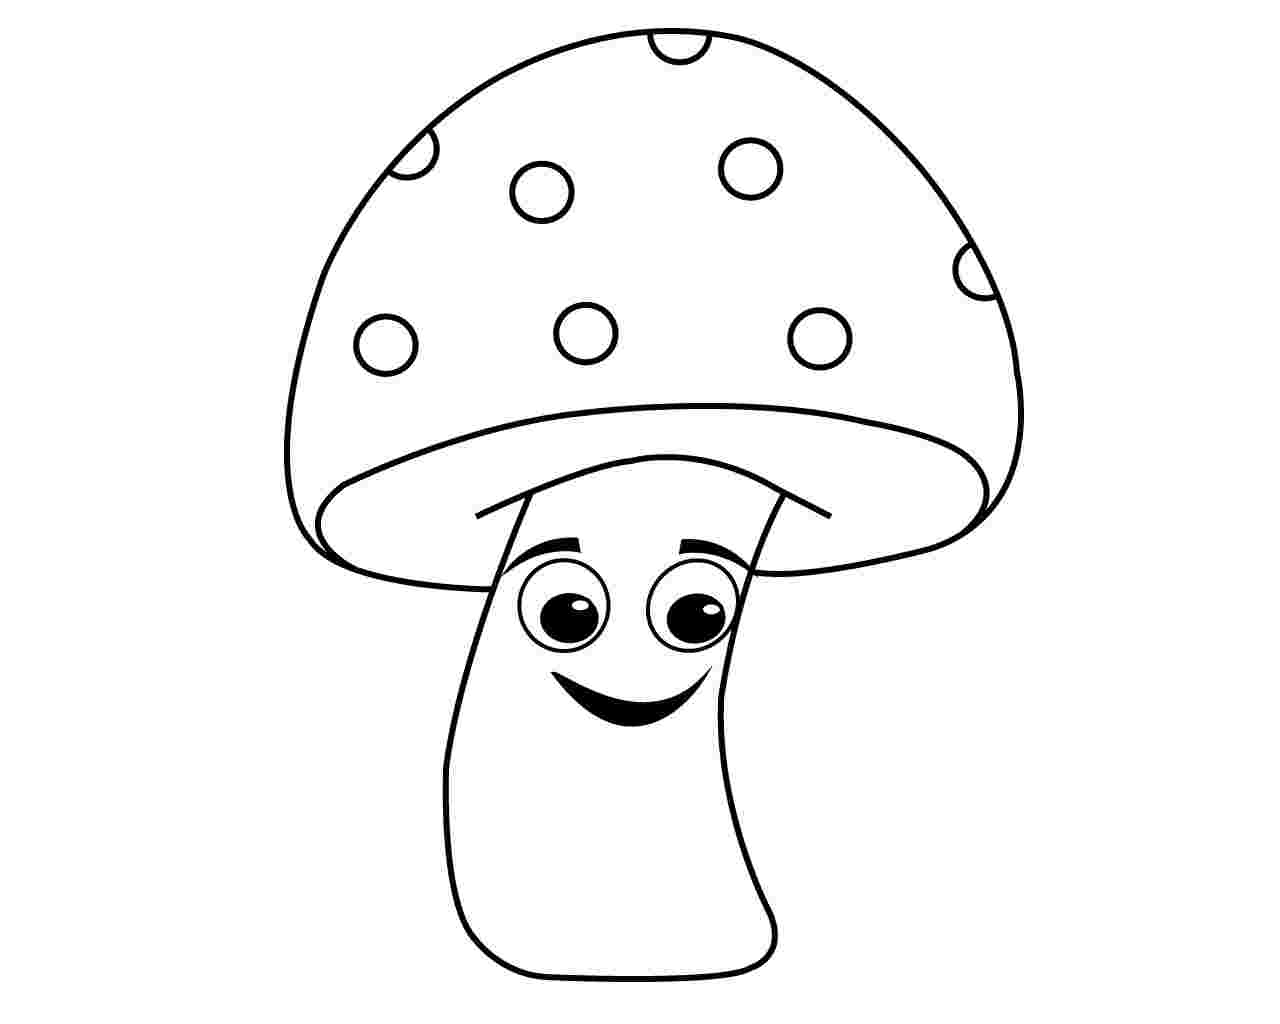 Mushroom Coloring Pages Best Coloring Pages For Kids